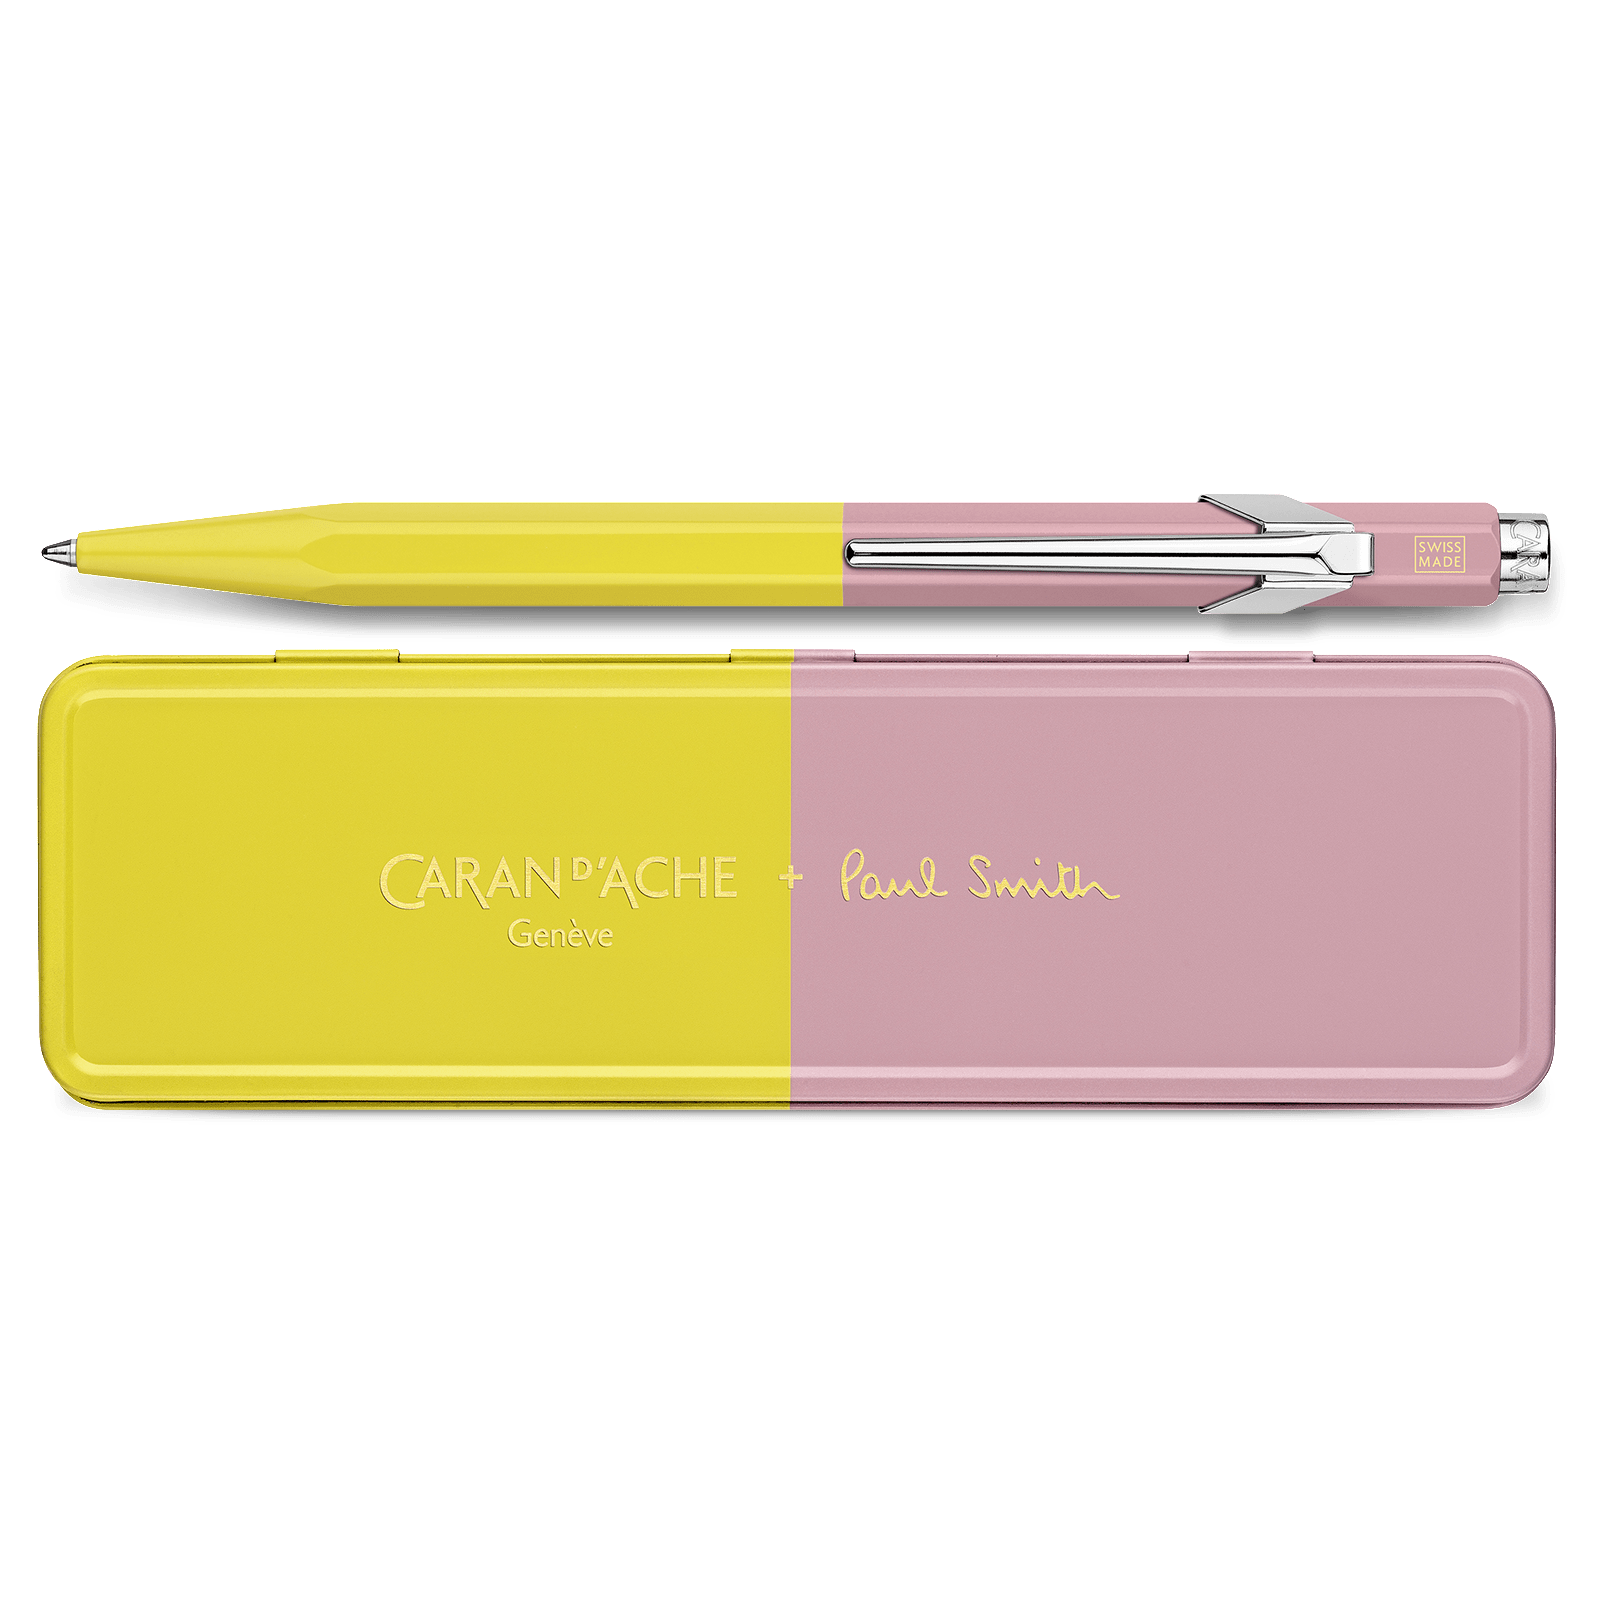 Caran D'Ache + Paul Smith Edition 4 849 Limited Edition Chartreuse Rose Ballpoint Pen - Pencraft the boutique